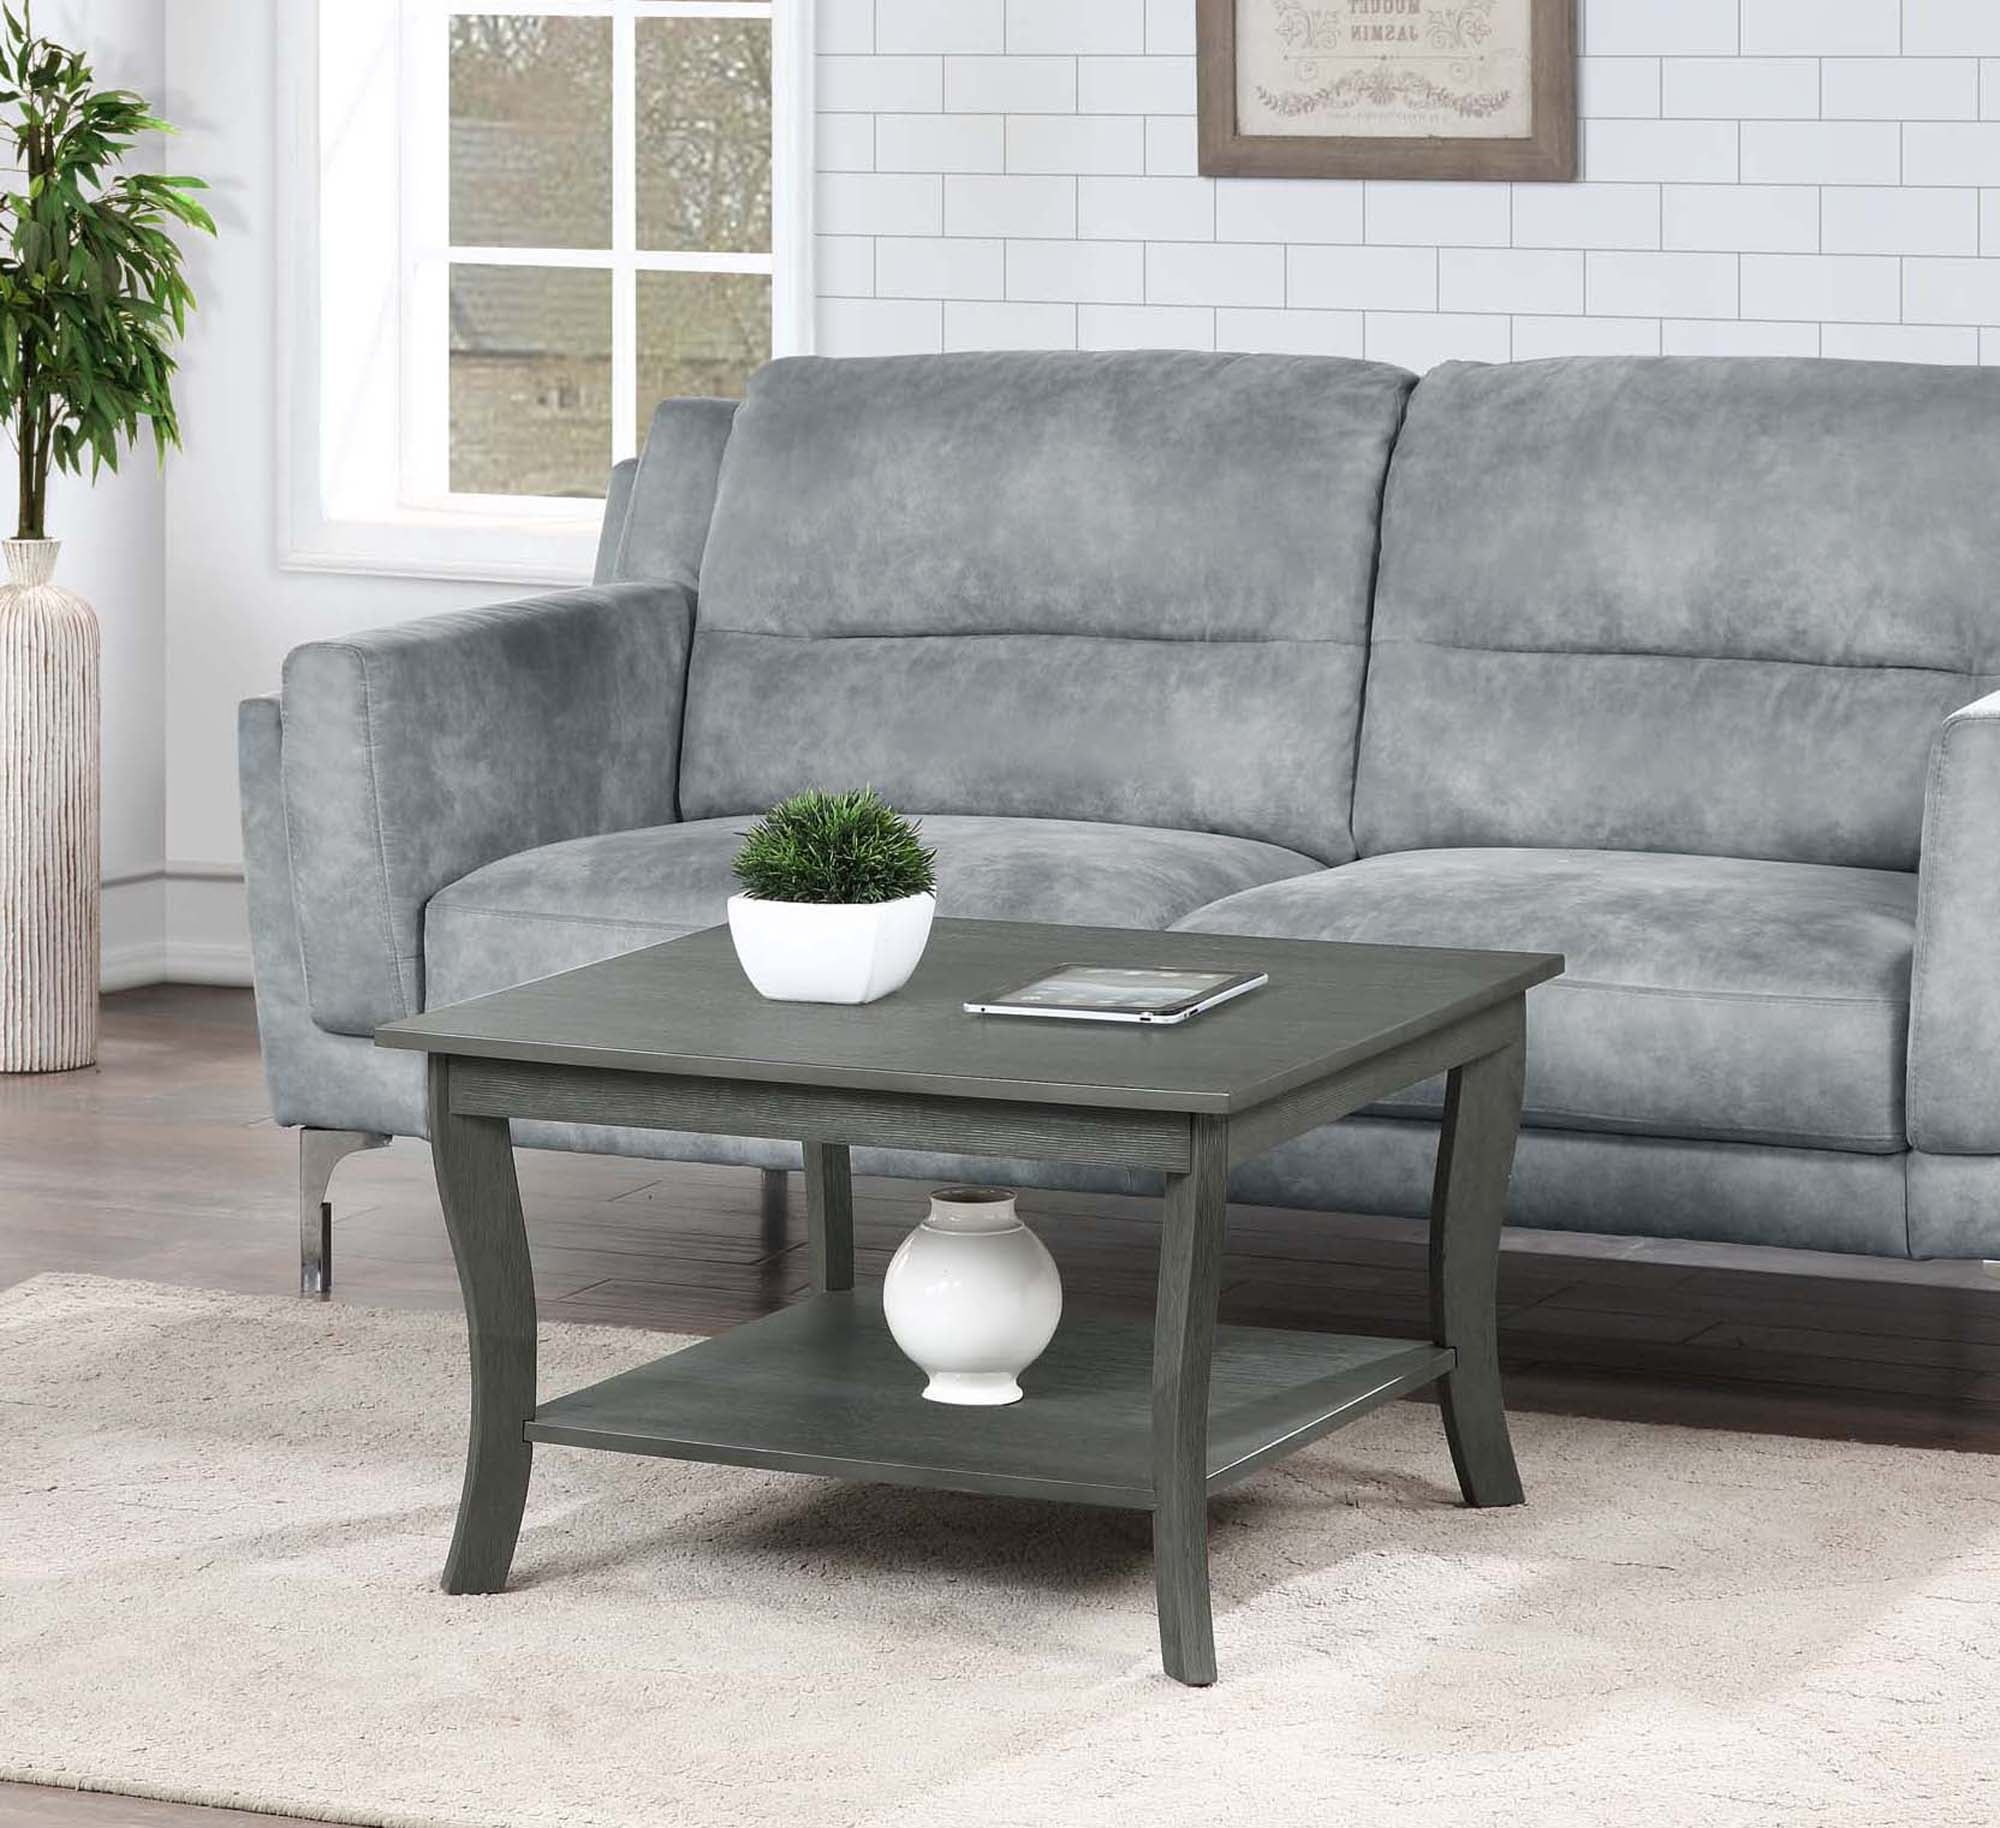 Convenience Concepts American Heritage Square Coffee Table, Multiple For Recent Transitional Square Coffee Tables (View 5 of 15)